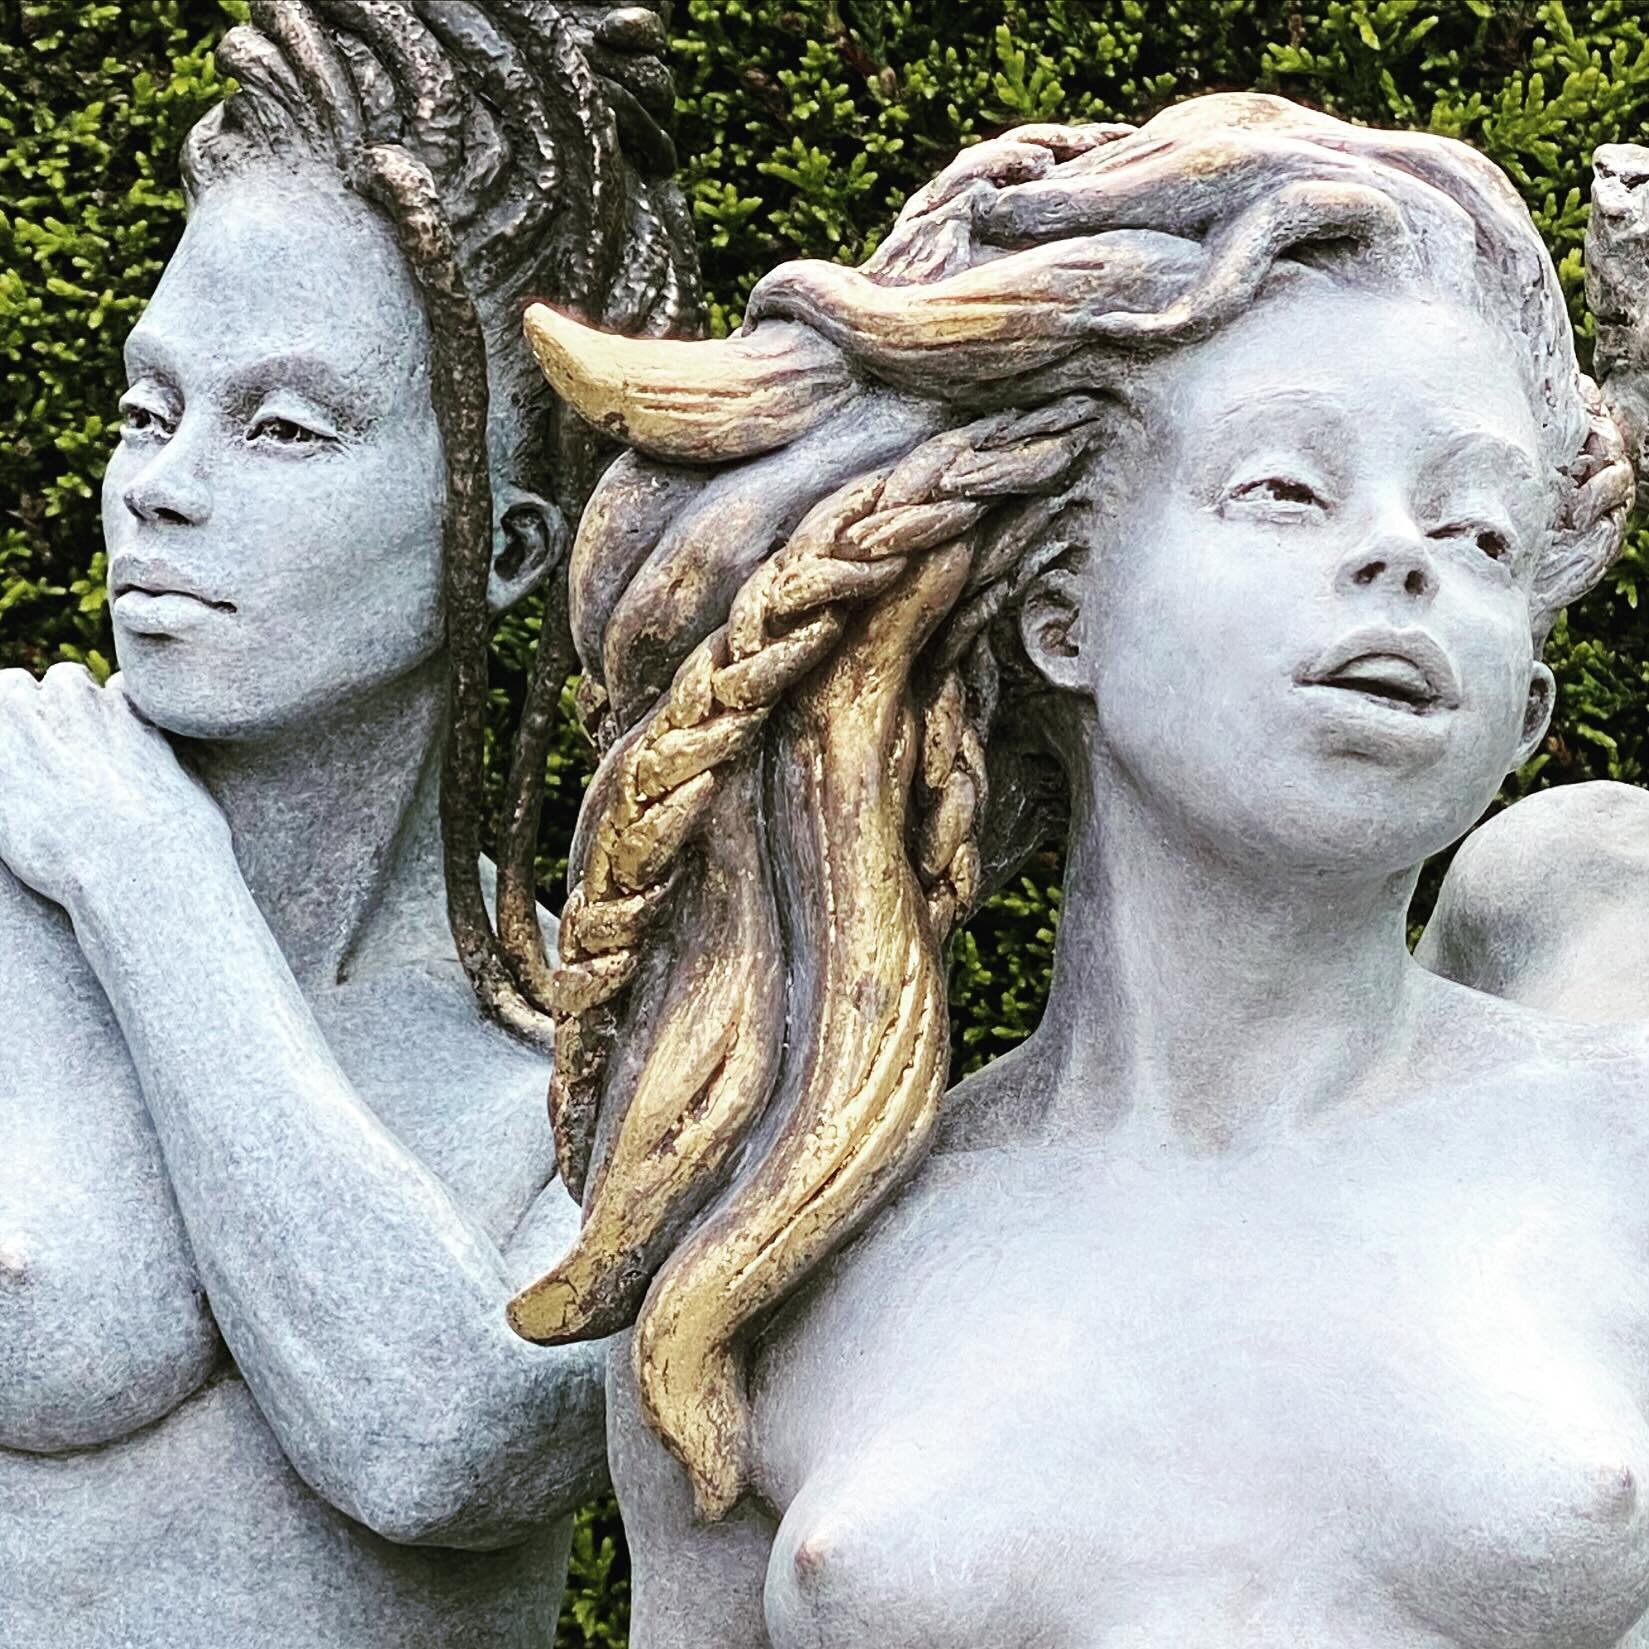 Happy Woman&rsquo;s day beautiful people ! 
#woman #womansday #women #girls #females #ladies #gals #lovelywomen #womansculpture #womanartist #sculpture